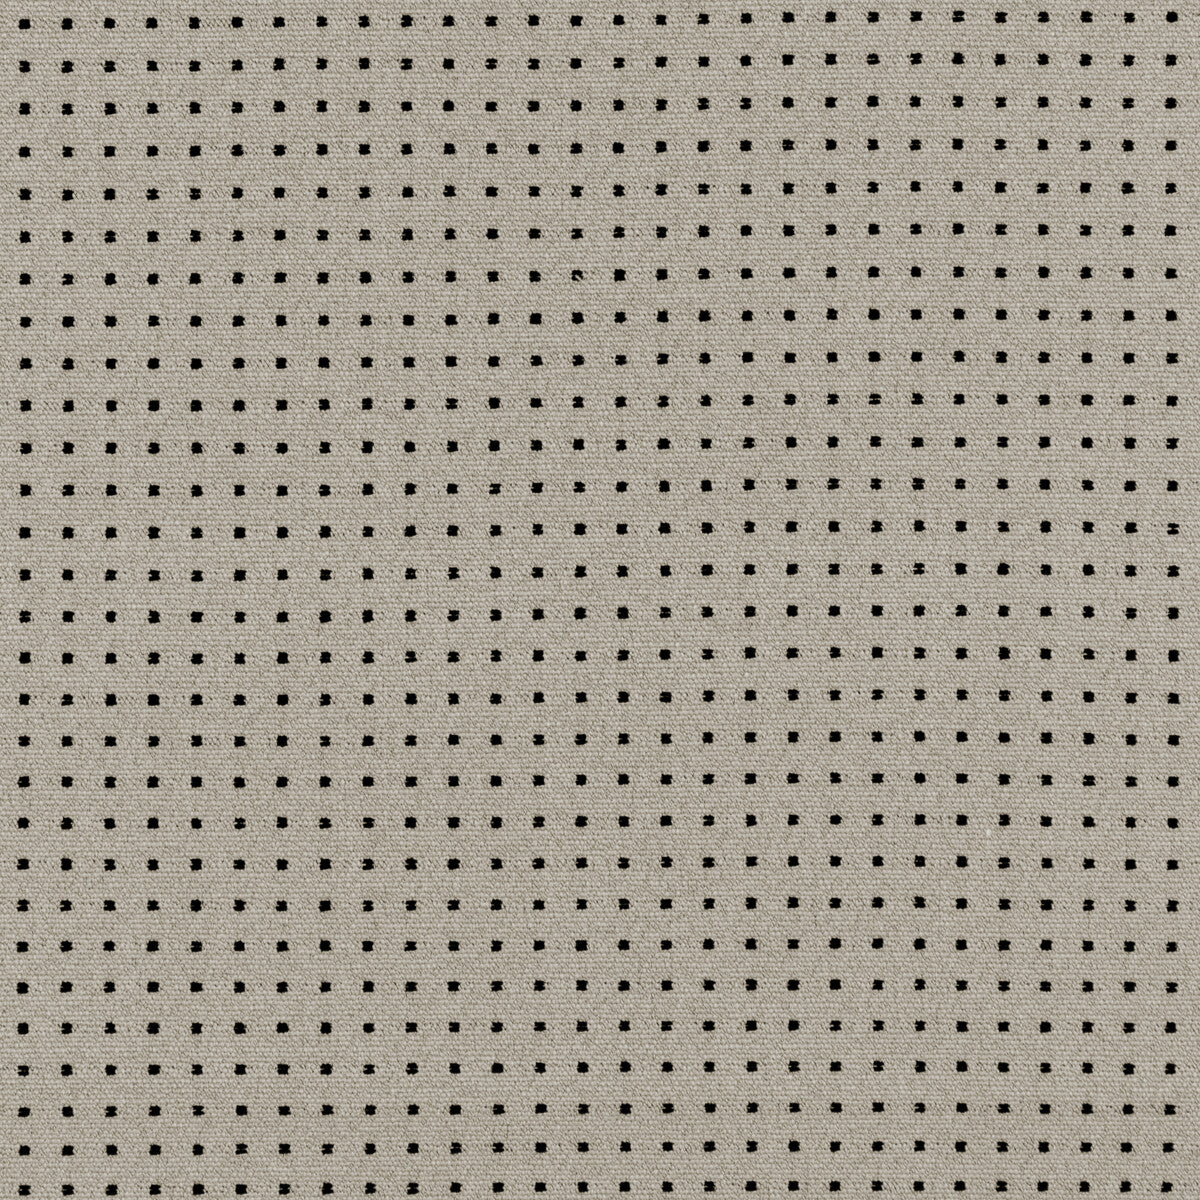 Tellus fabric in silver color - pattern GWF-3764.11.0 - by Lee Jofa Modern in the Kelly Wearstler VI collection